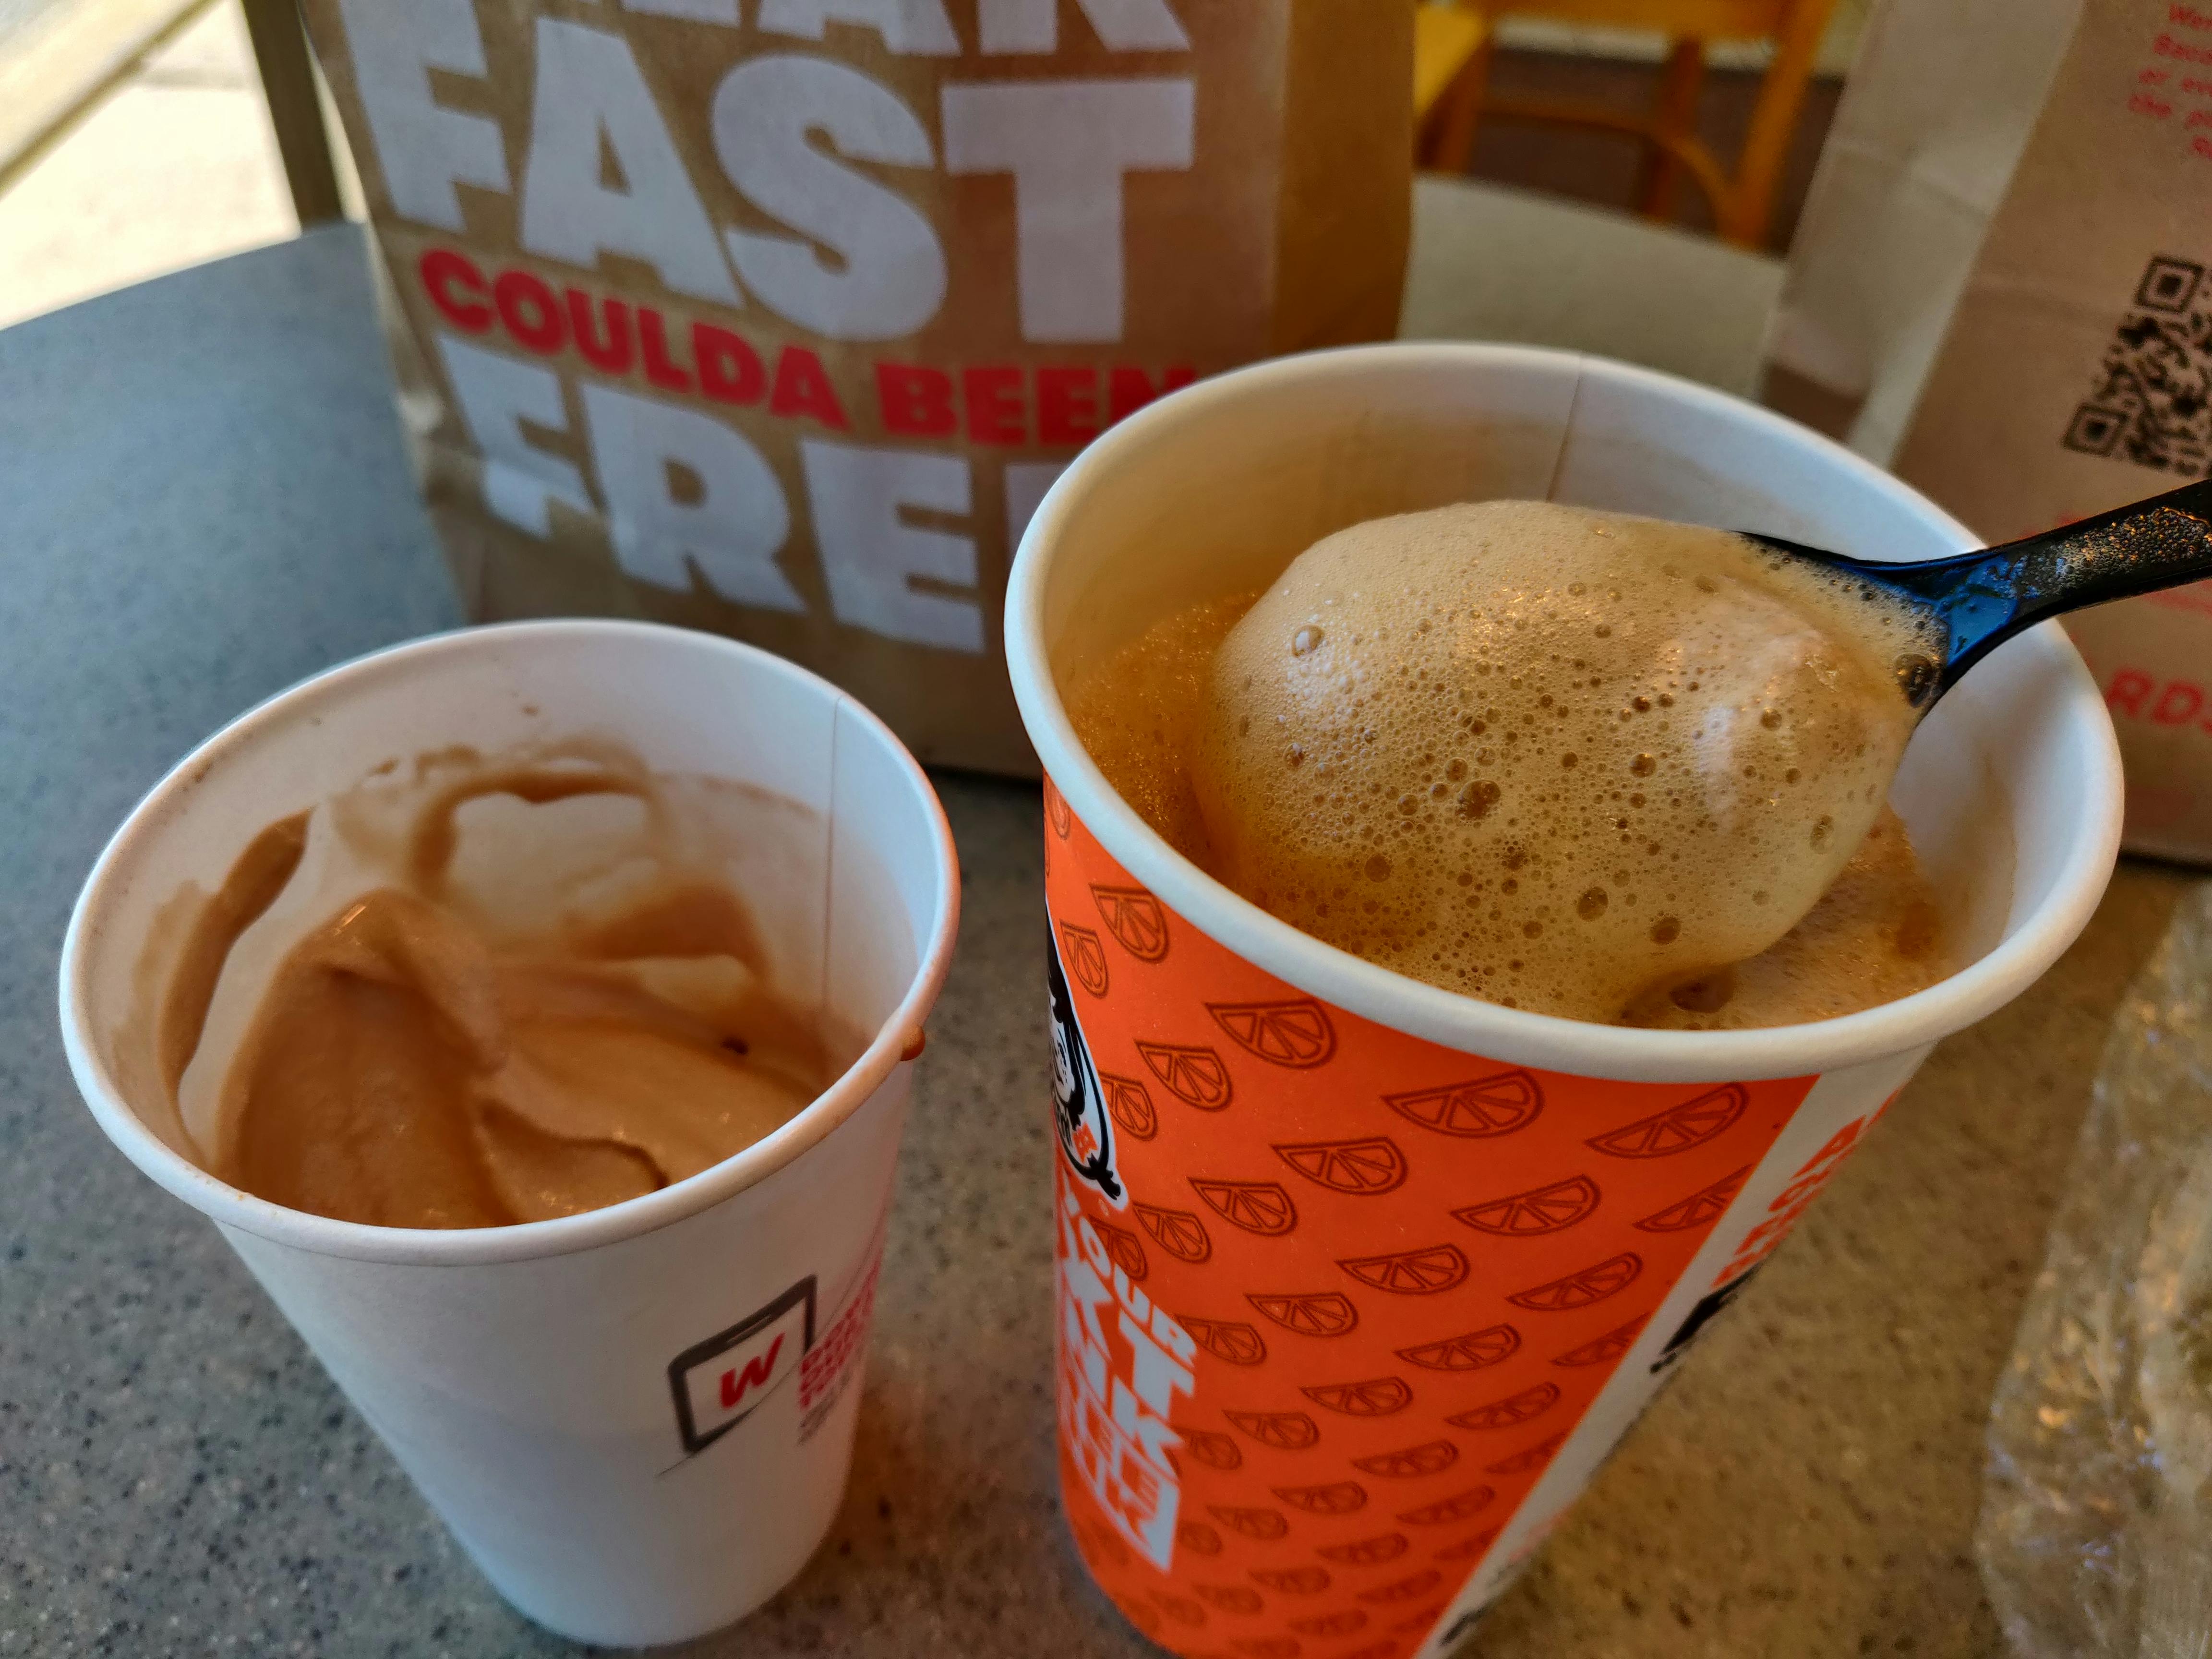 A Wendy's frosty and a Wendy's soda being mixed together with a spoon.